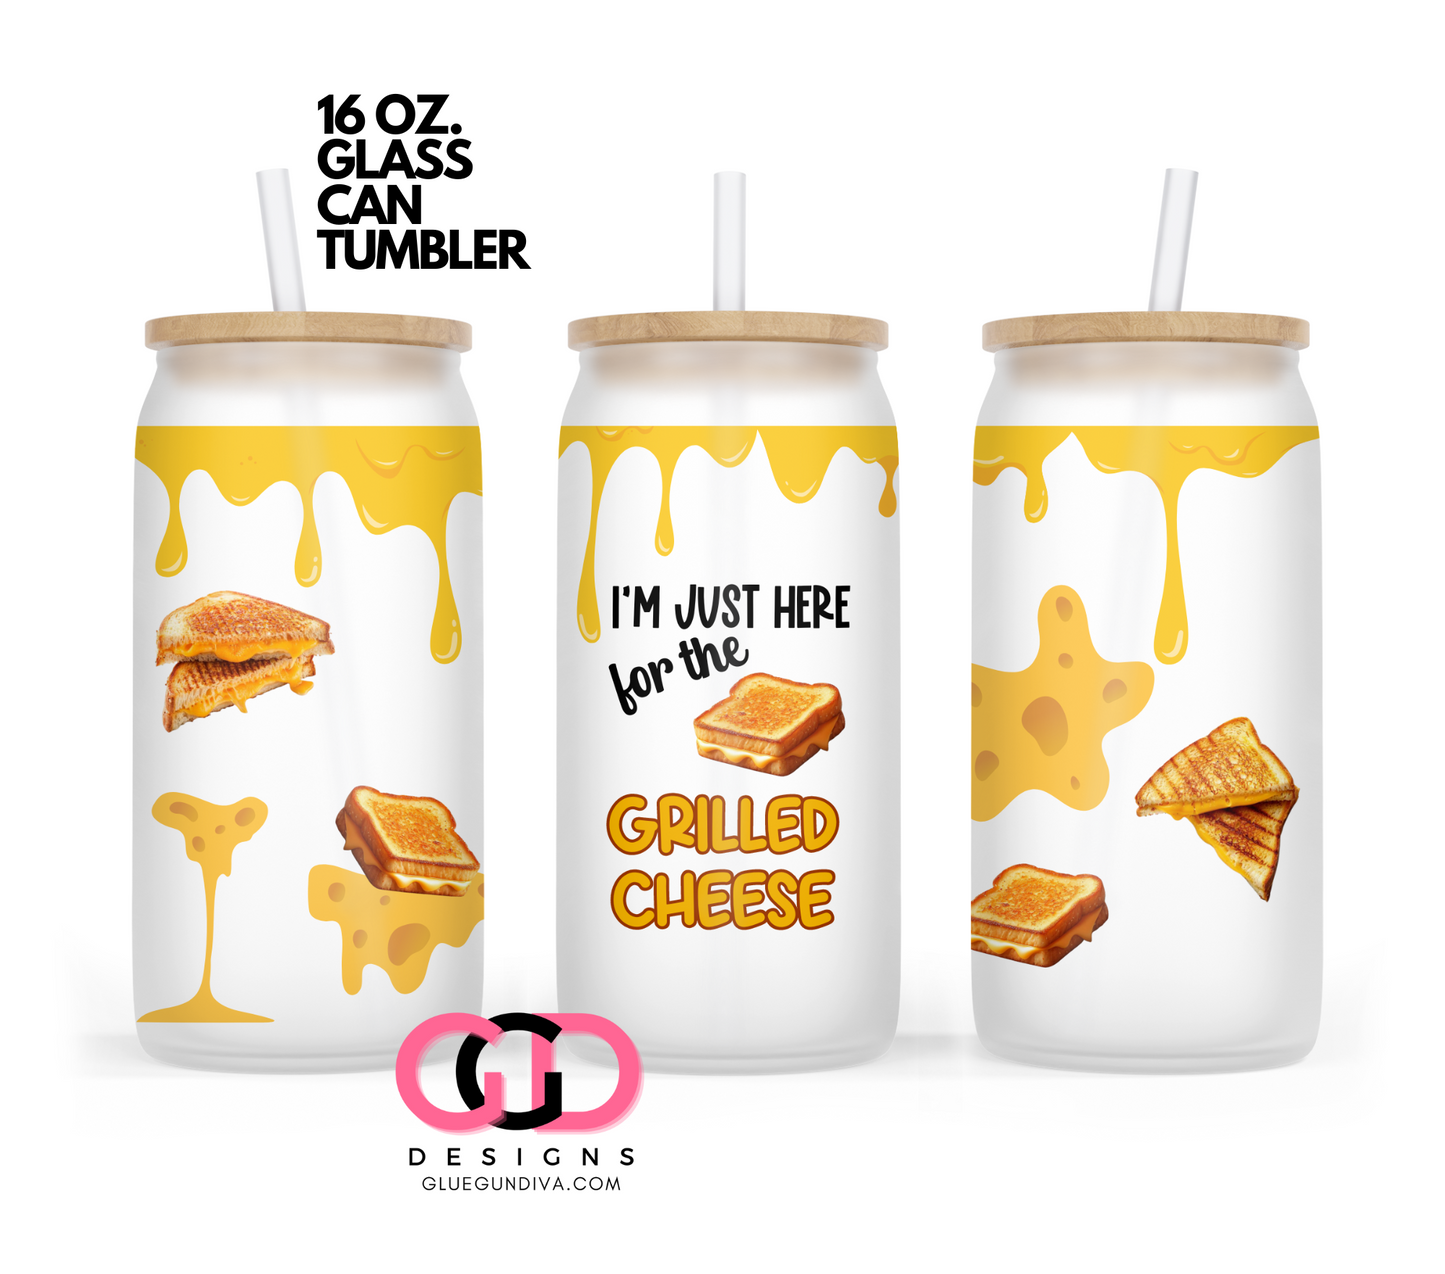 Just here for the grilled cheese -   Digital wrap for 16 oz glass can